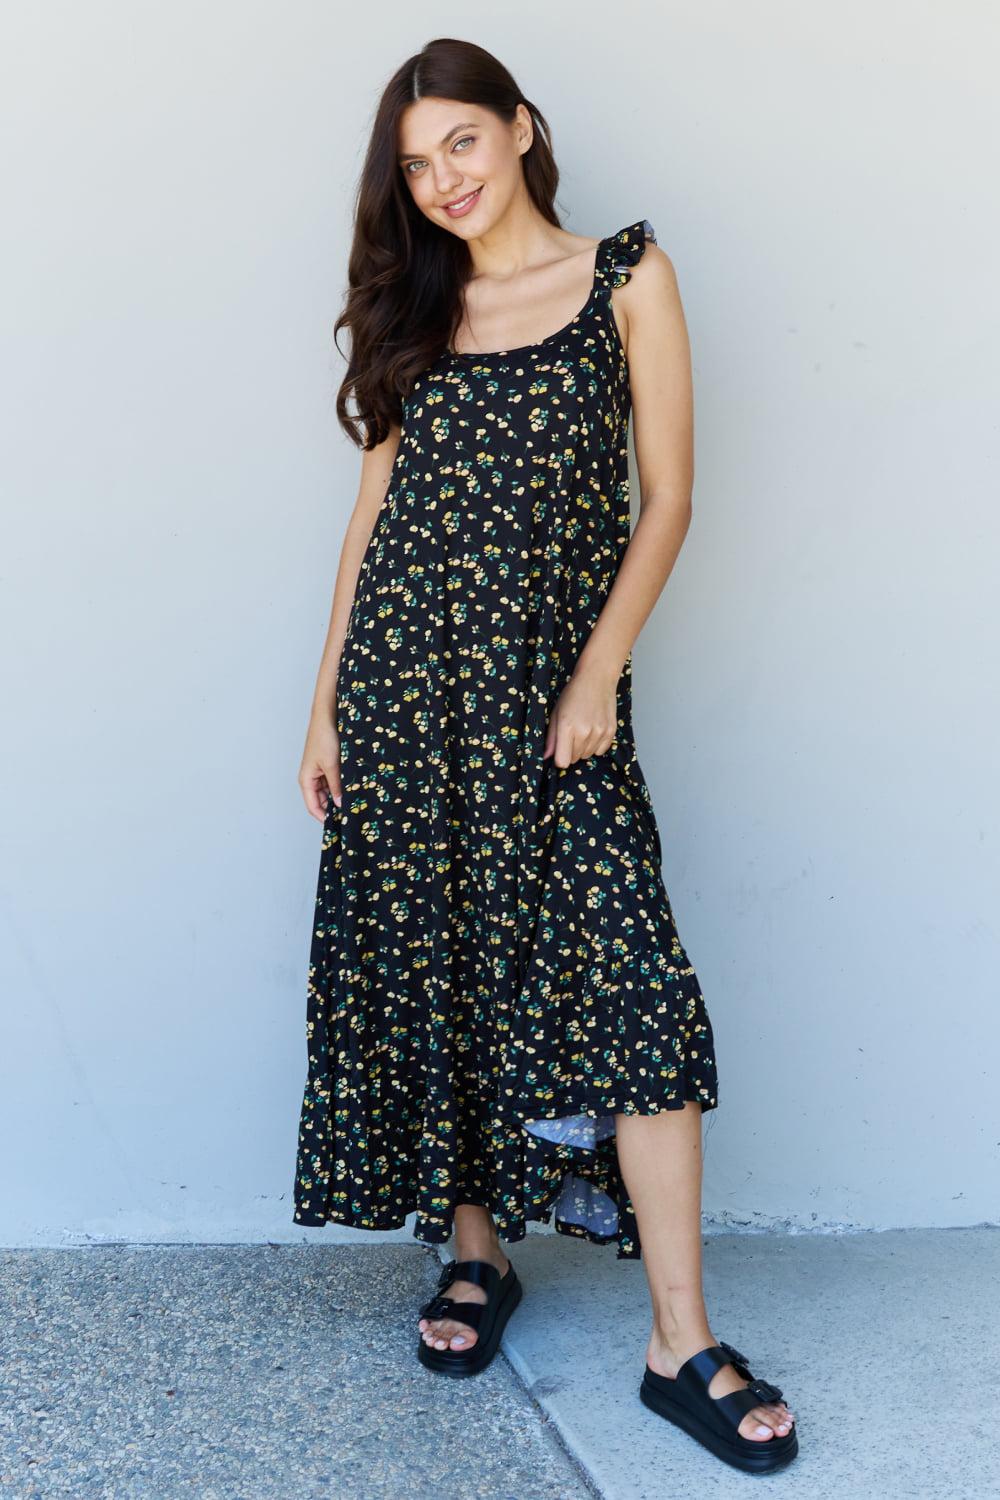 Doublju In The Garden Ruffle Floral Maxi Dress in  Black Yellow Floral BLUE ZONE PLANET